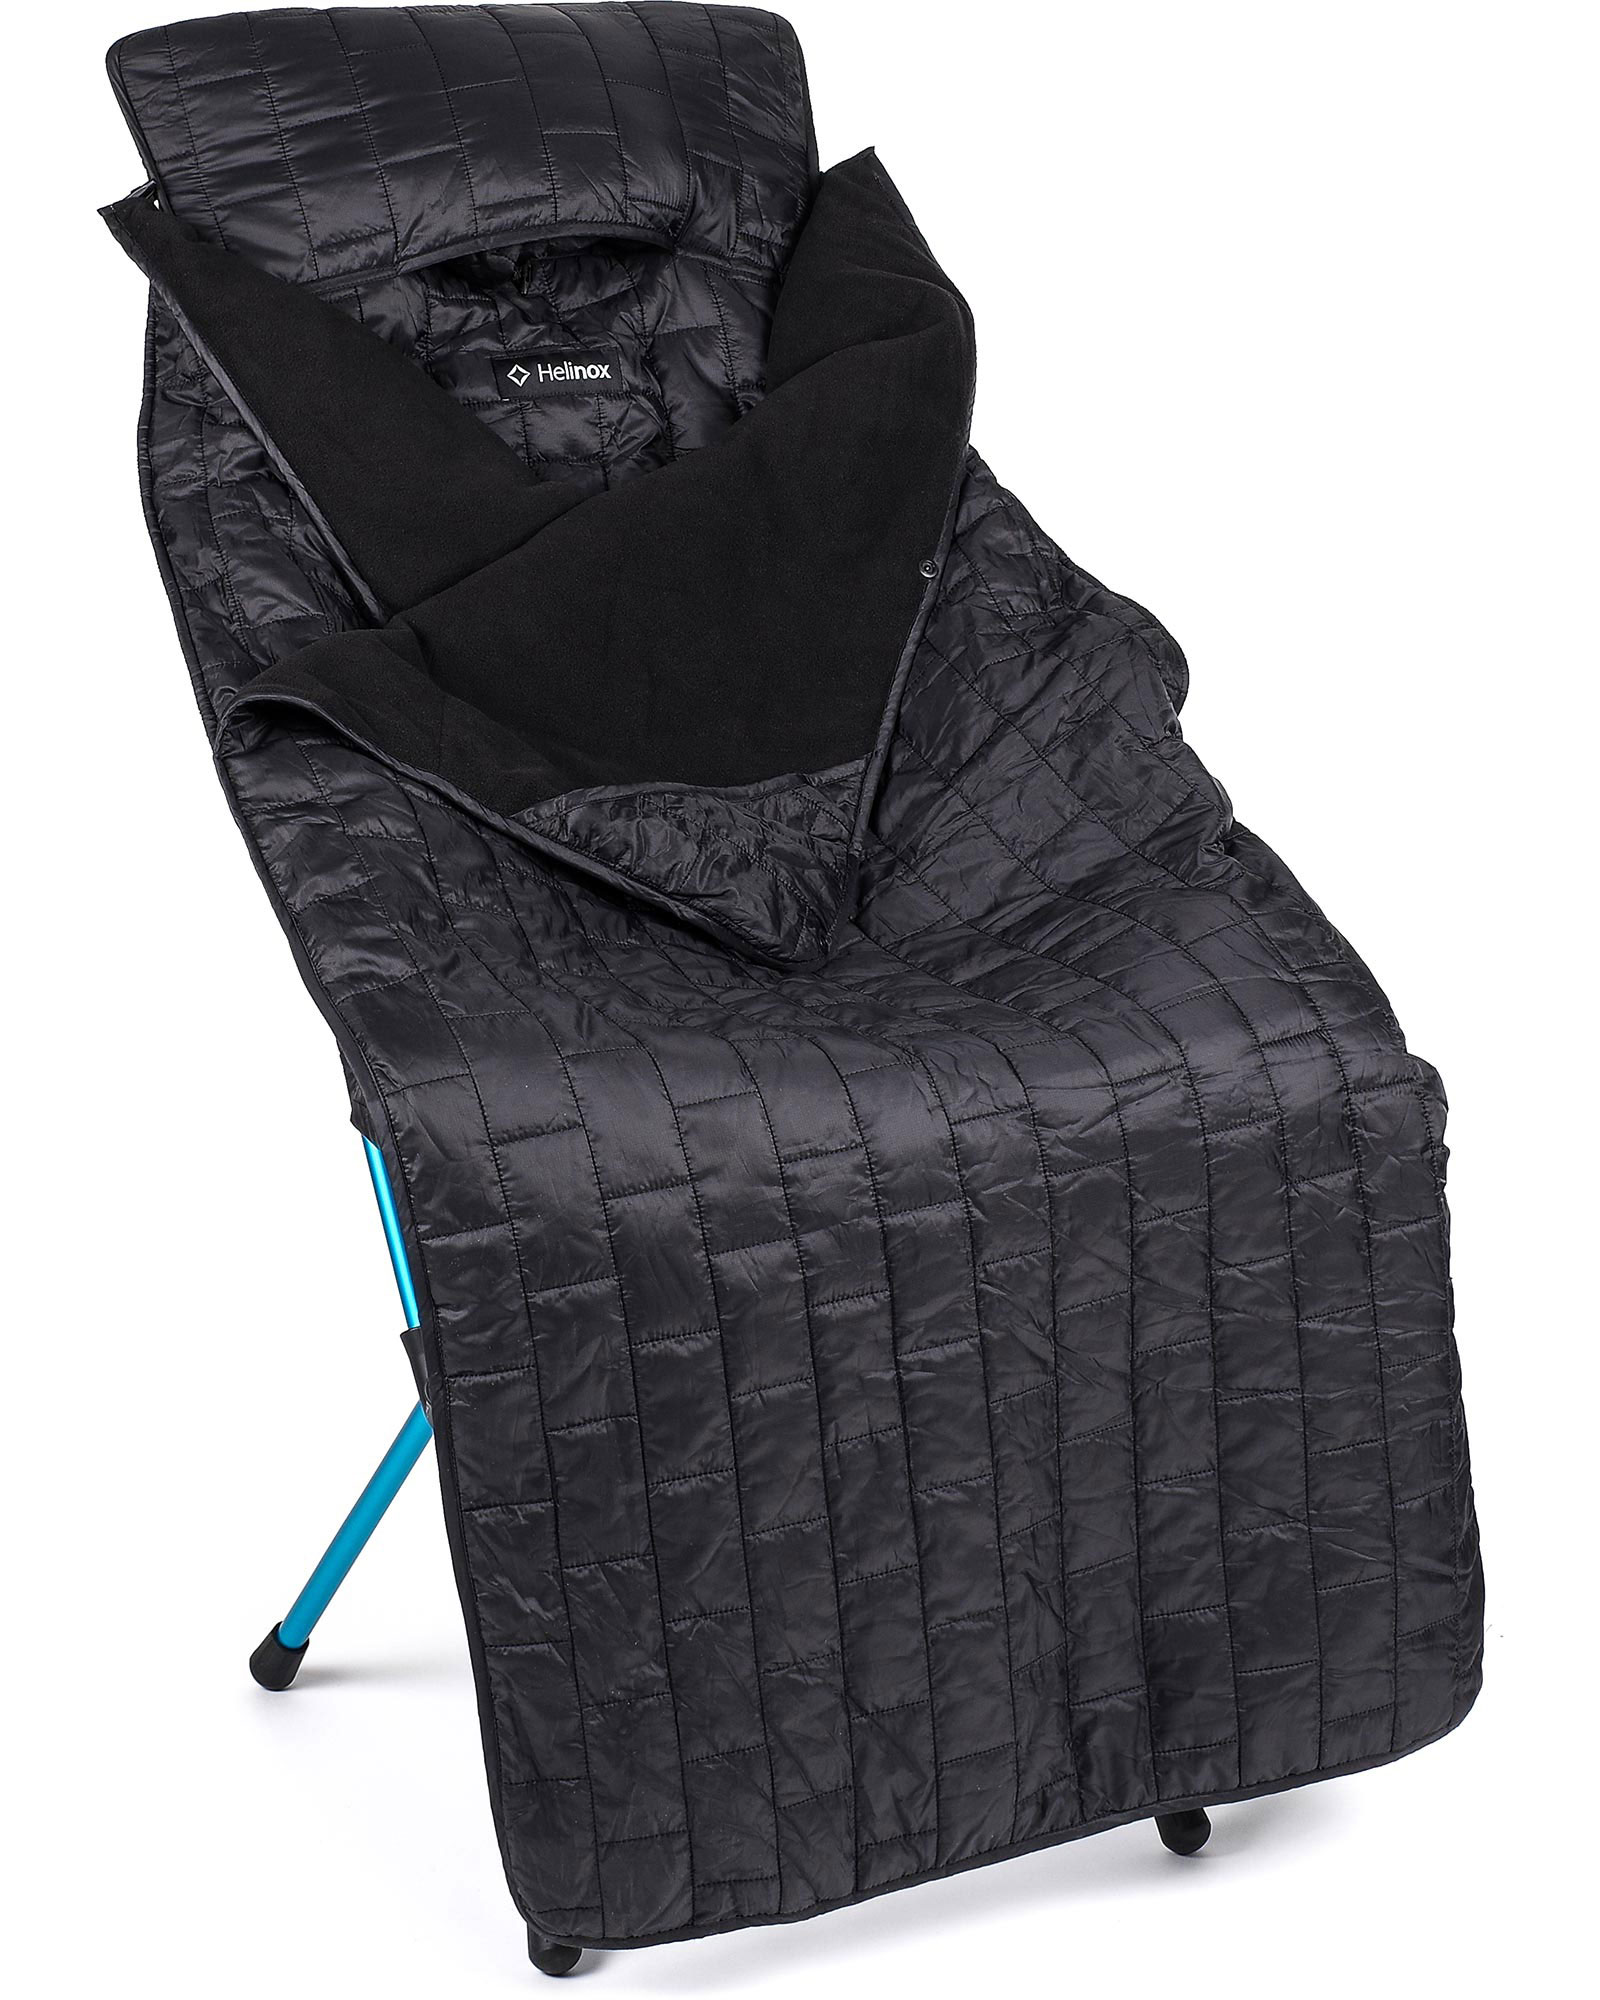 Helinox Toasty for Sunset Chair - black